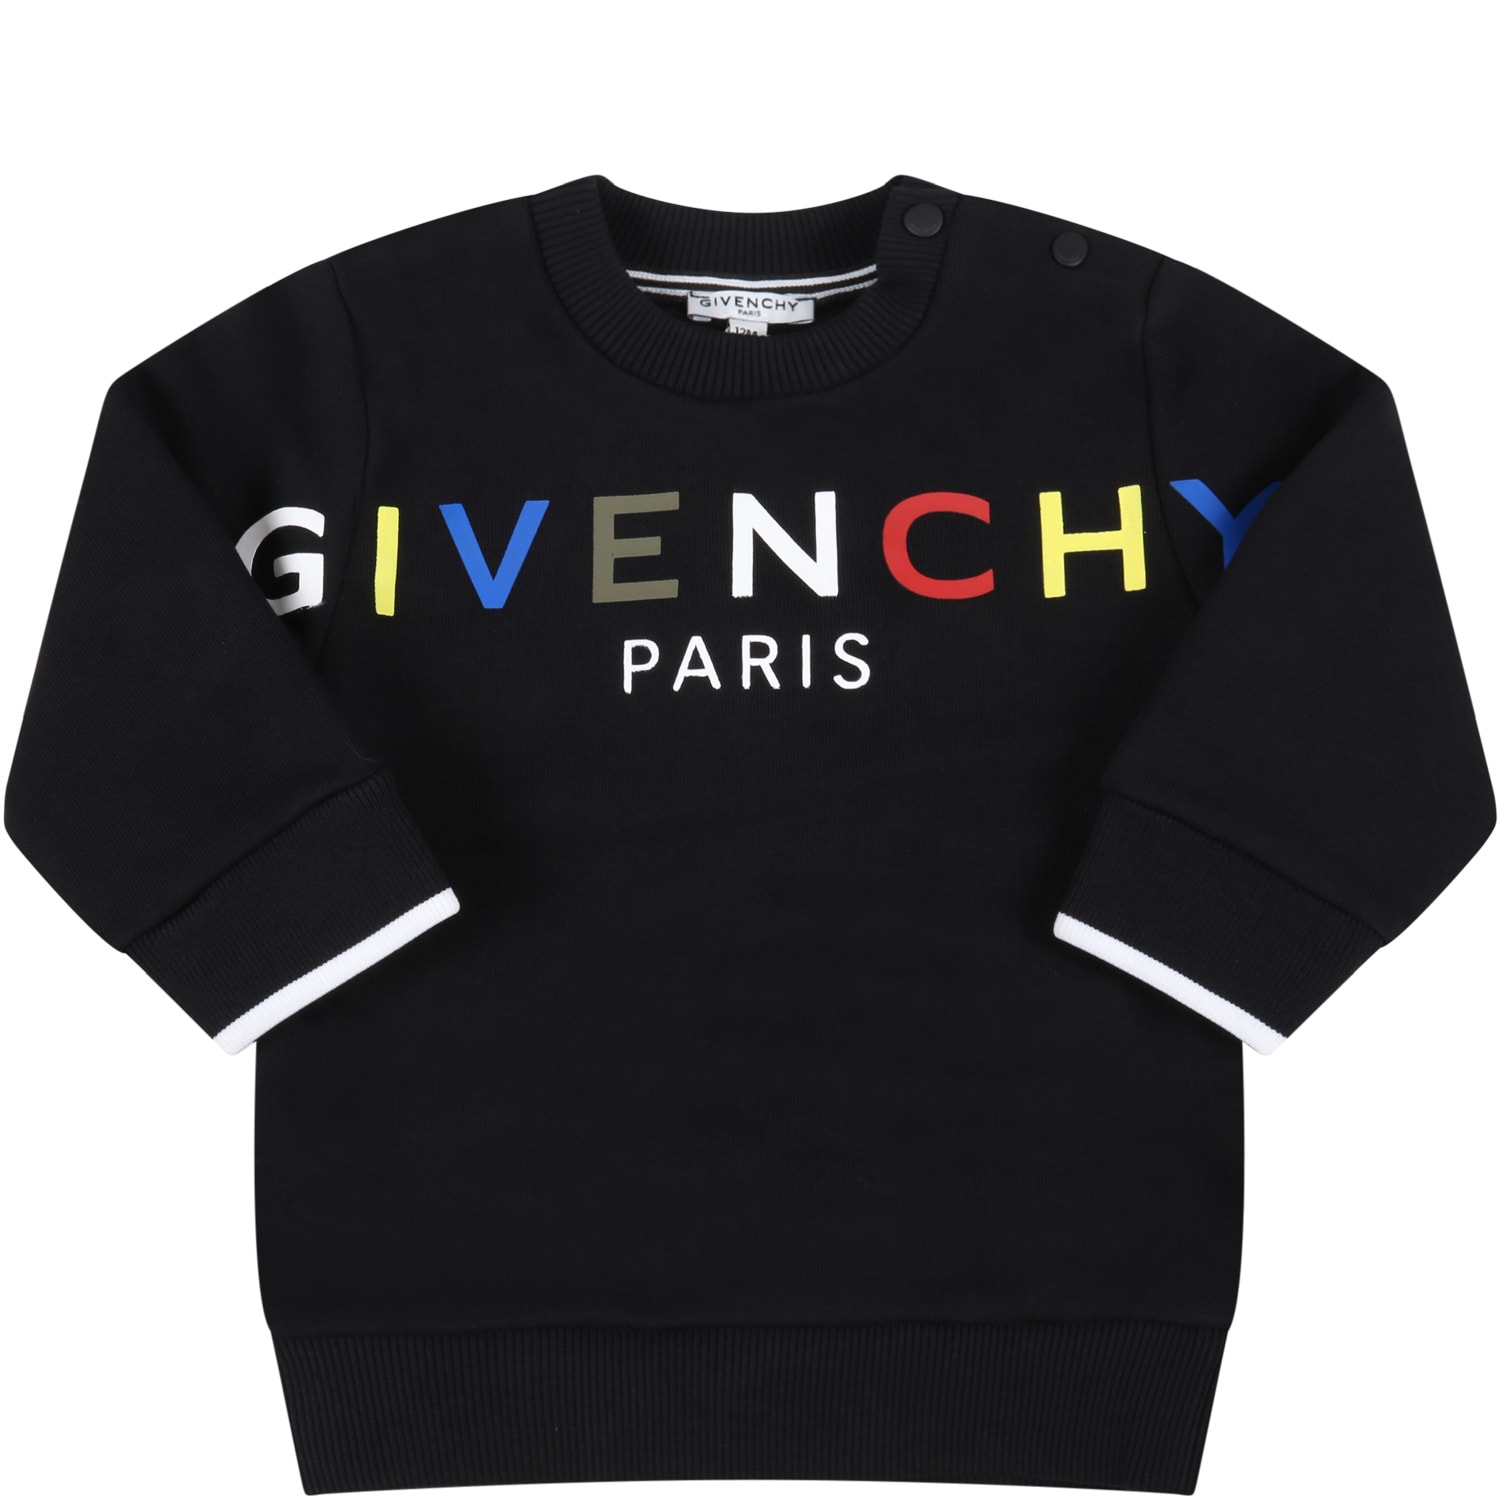 GIVENCHY BLACK SWEATSHIRT FOR BABY KIDS WITH LOGO,H05188 09B